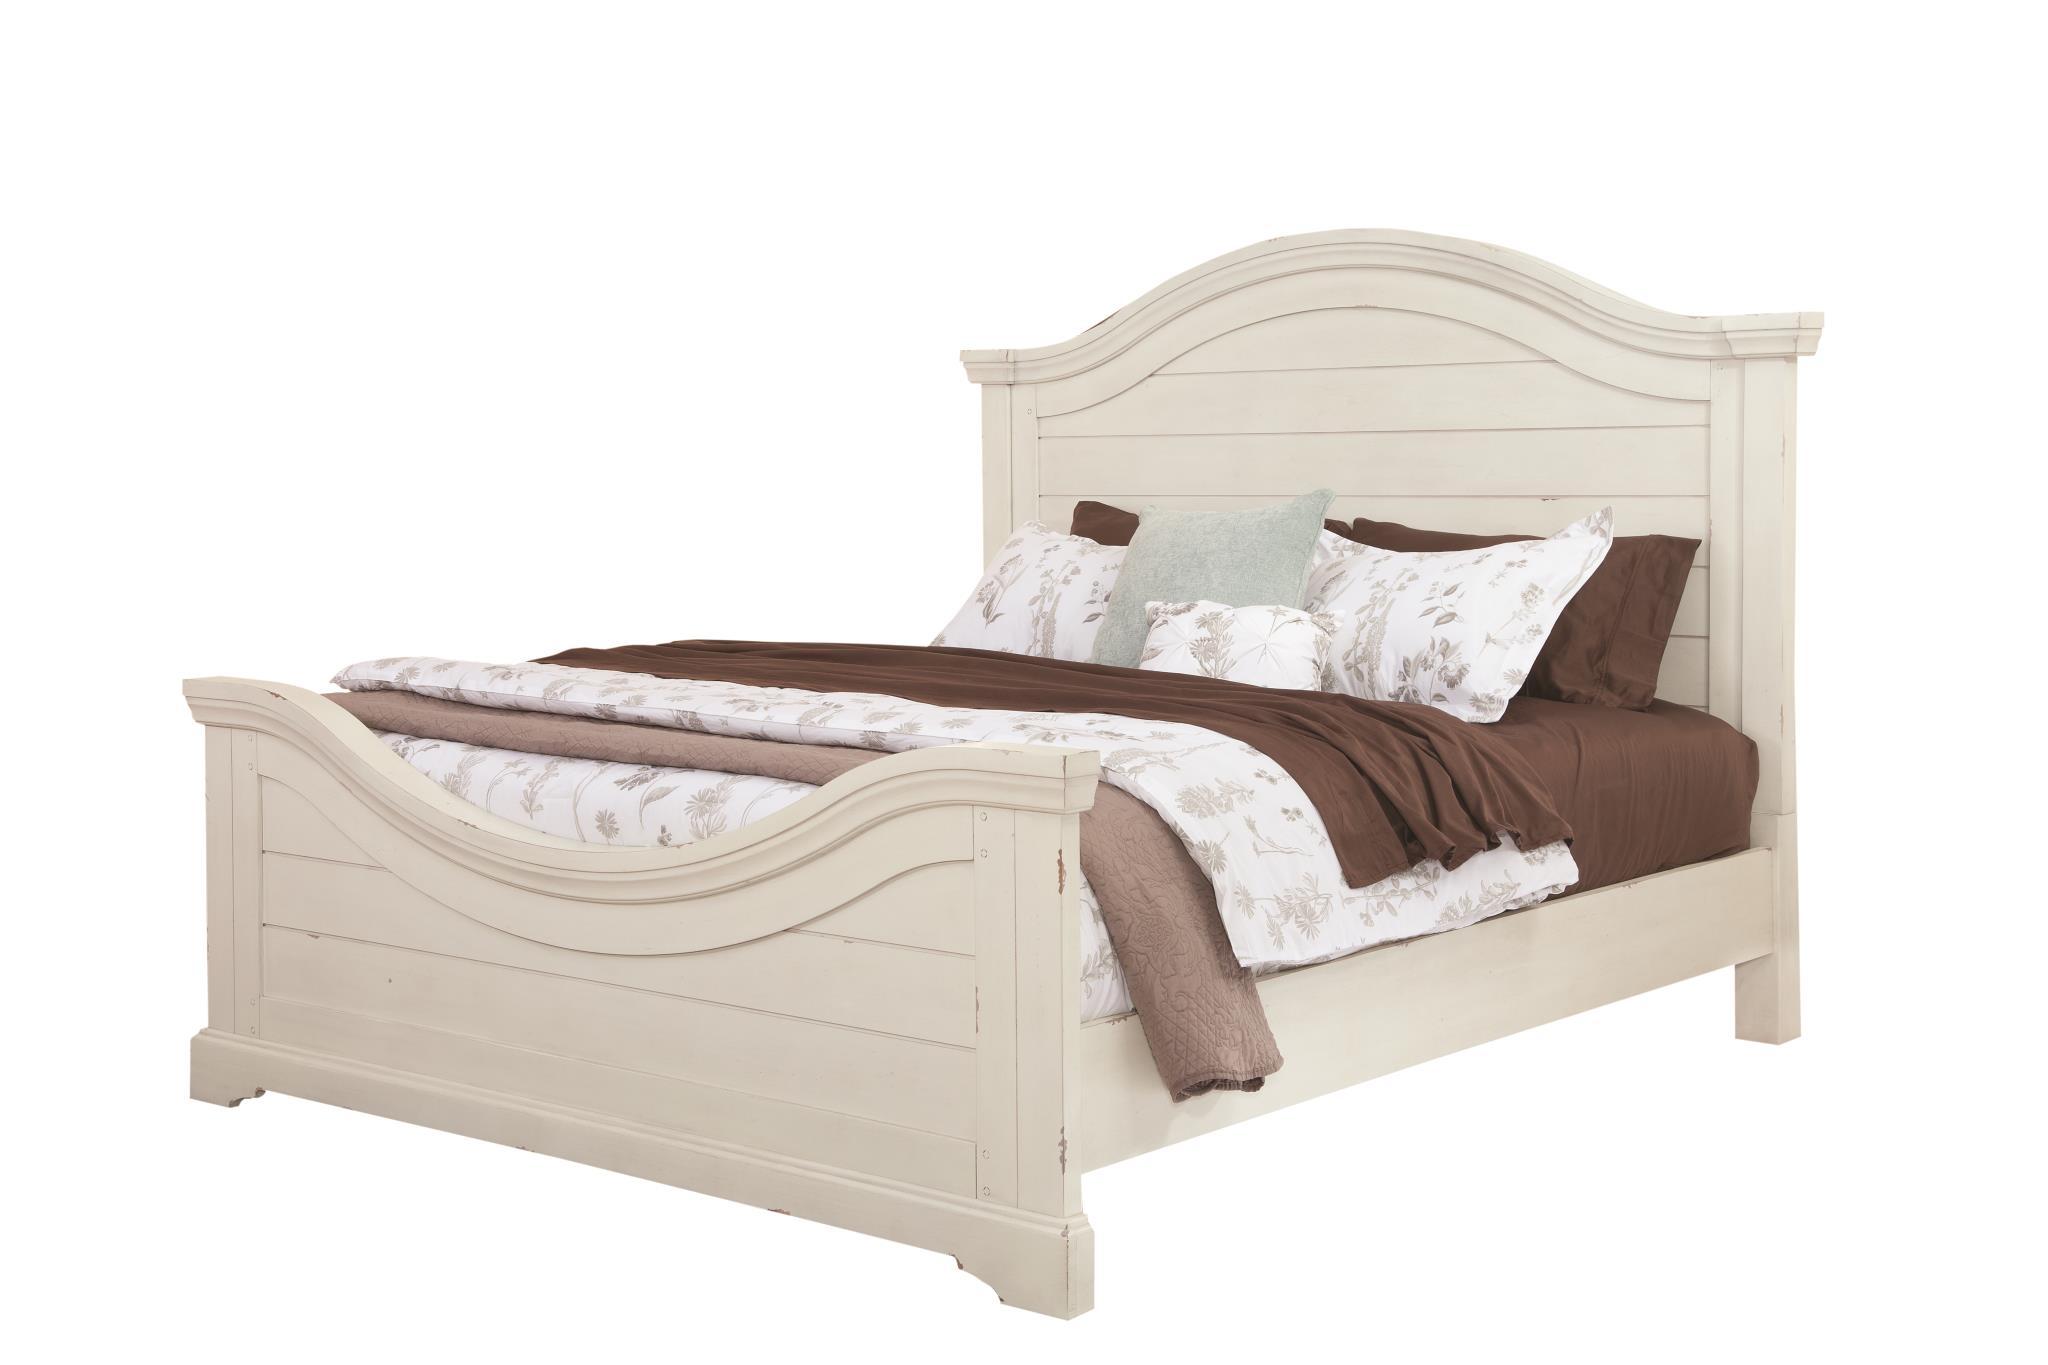 Classic, Traditional Panel Bed 7810 STONEBROOK 7810-50PAN in Antique White 